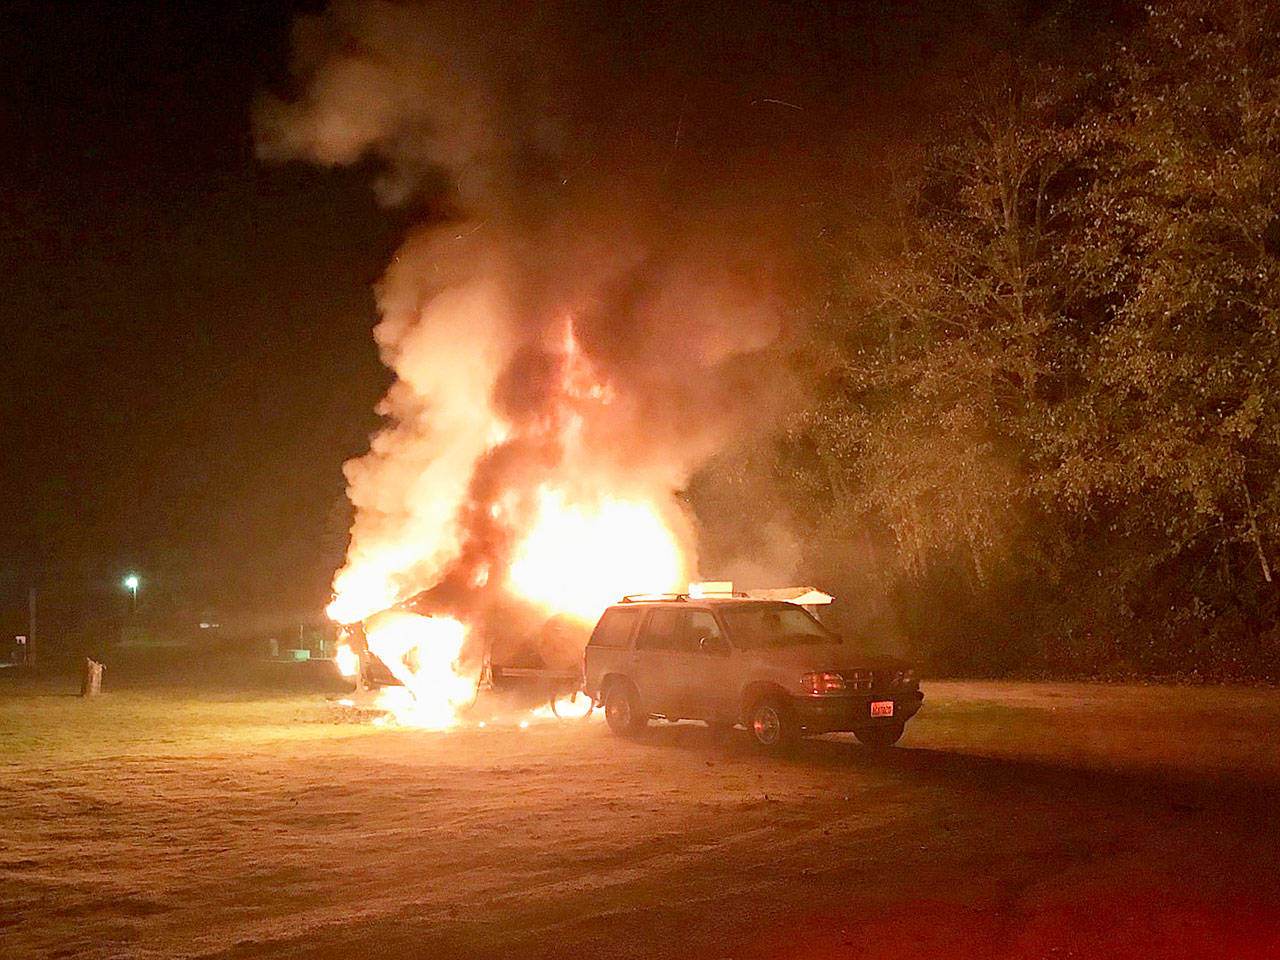 A man was severely injured in an RV fire Thursday morning at Island County Fairgrounds. (South Whidbey Fire/EMS)